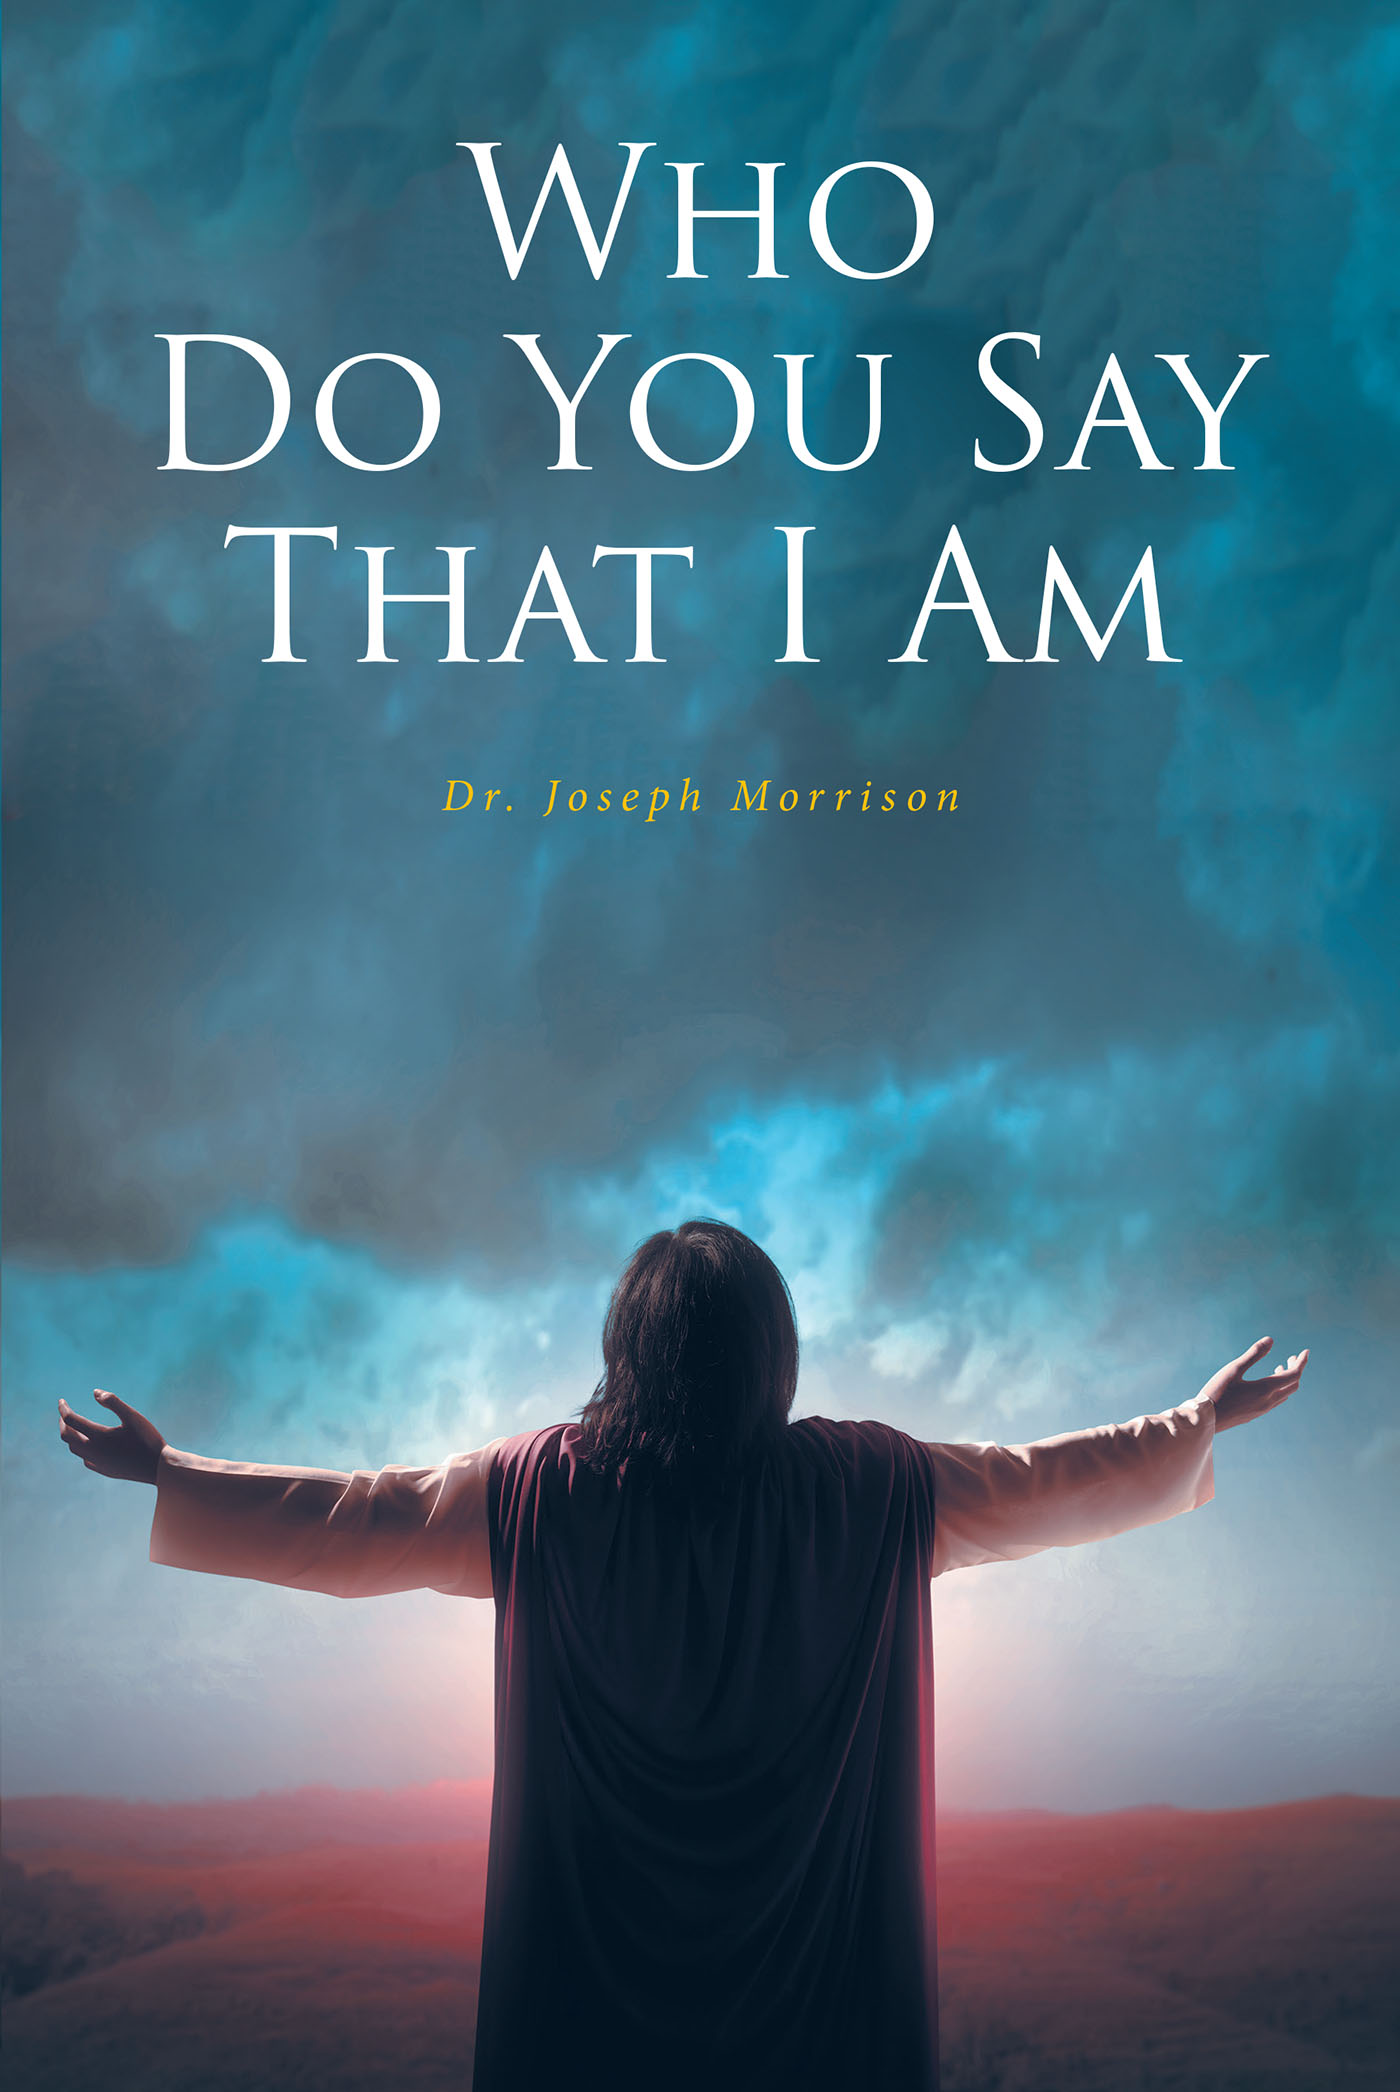 Dr. Joseph Morrison’s Newly Released "Who Do You Say That I Am" is an Encouraging Message of the Need to Truly Surrender Oneself to God